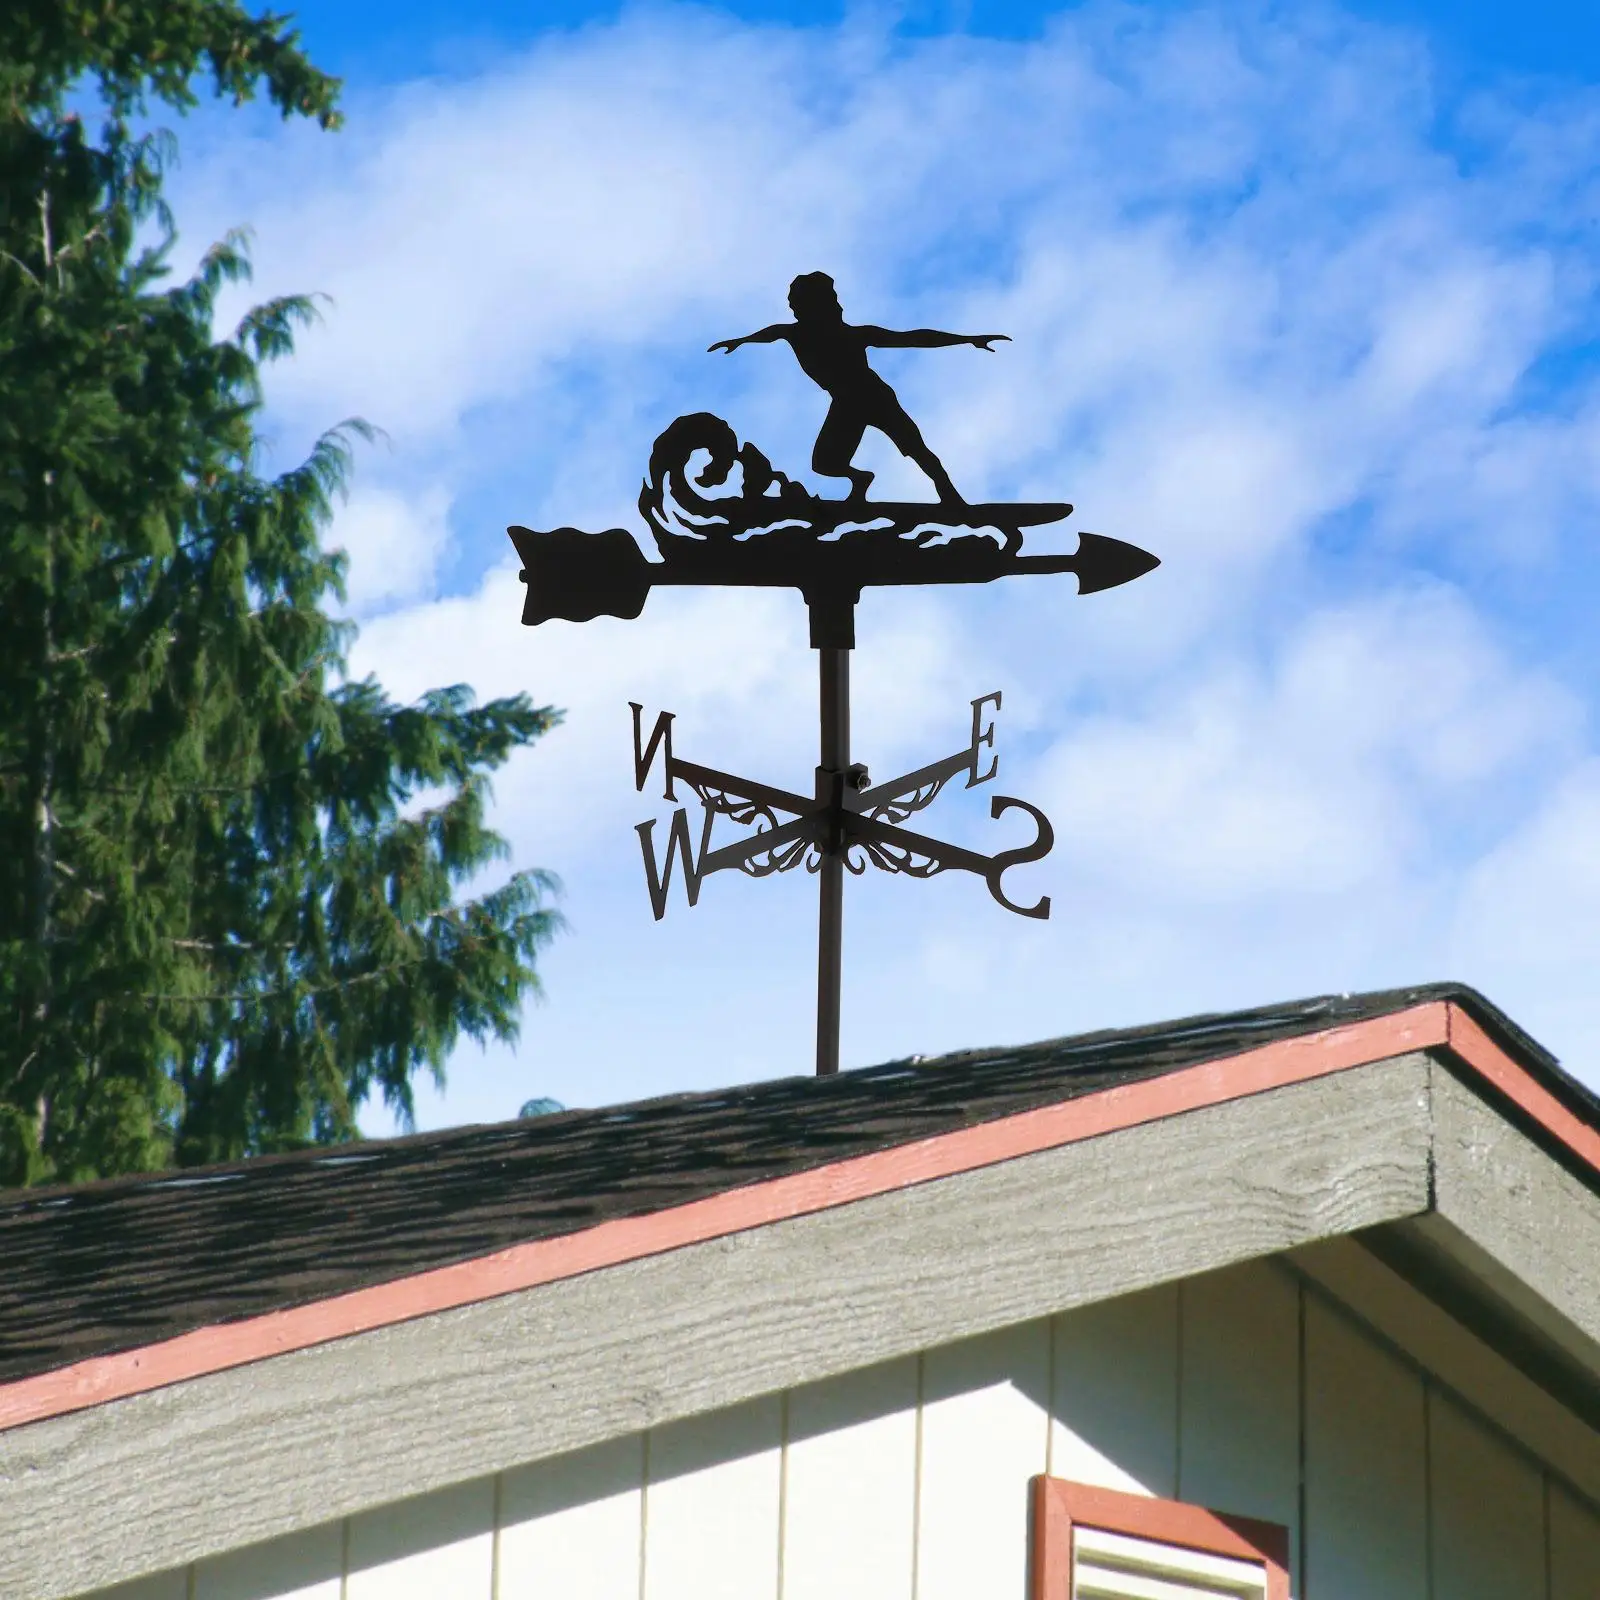 Iron Weather Vane Wind Vane Wind Direction Indicator Roof Mount for Farmhouse Garden Patio Crafts Ornament